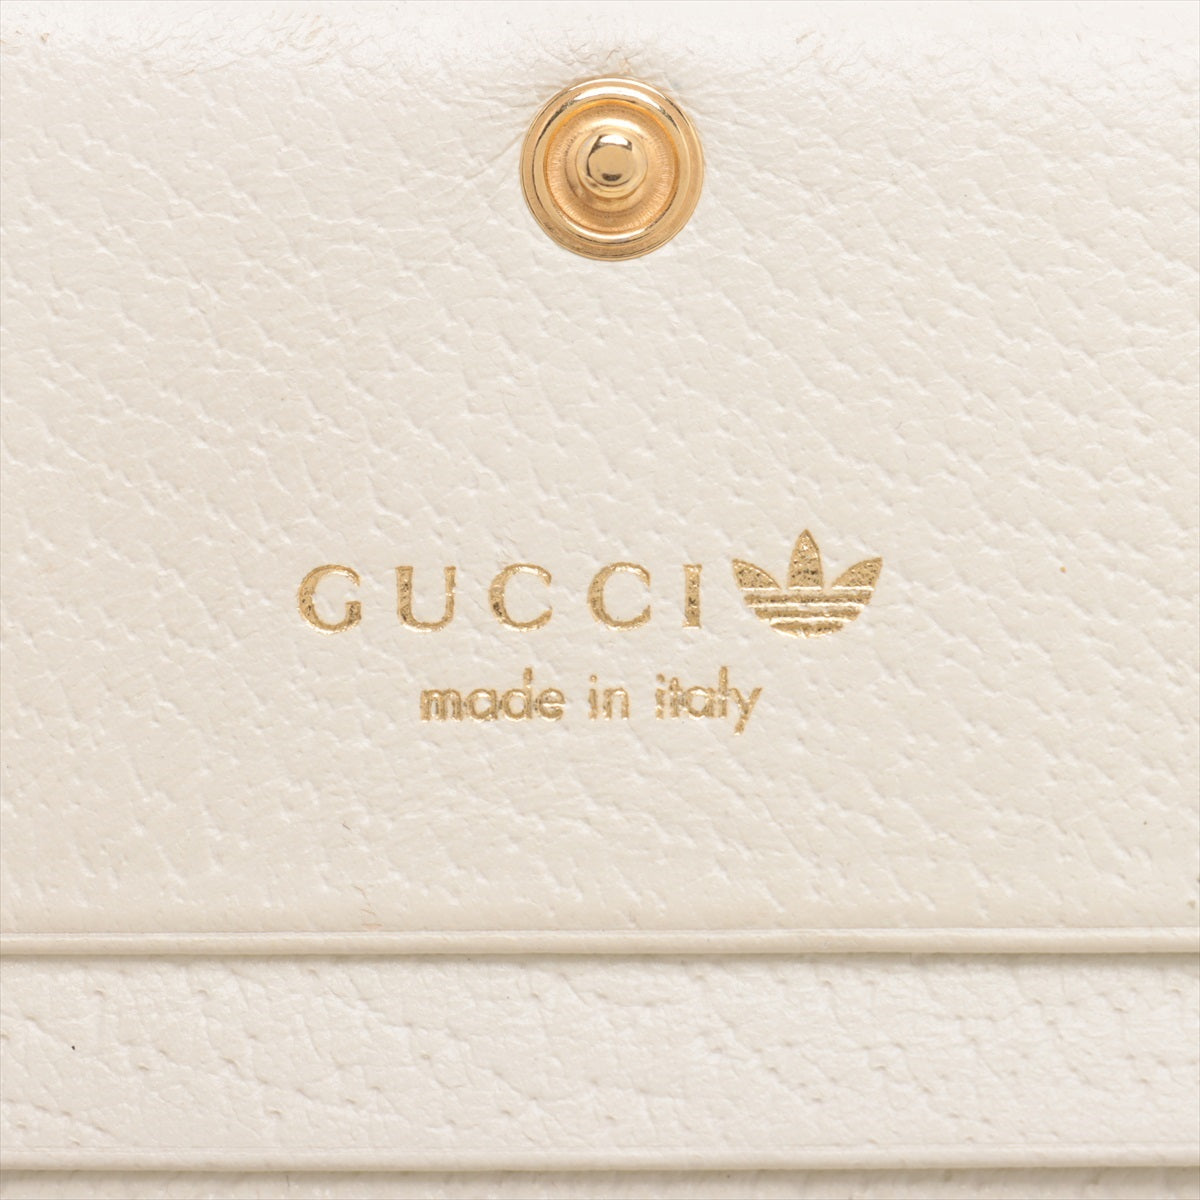 Gucci x Adidas HorseBit Leather Compact Wallet Ivory 702248